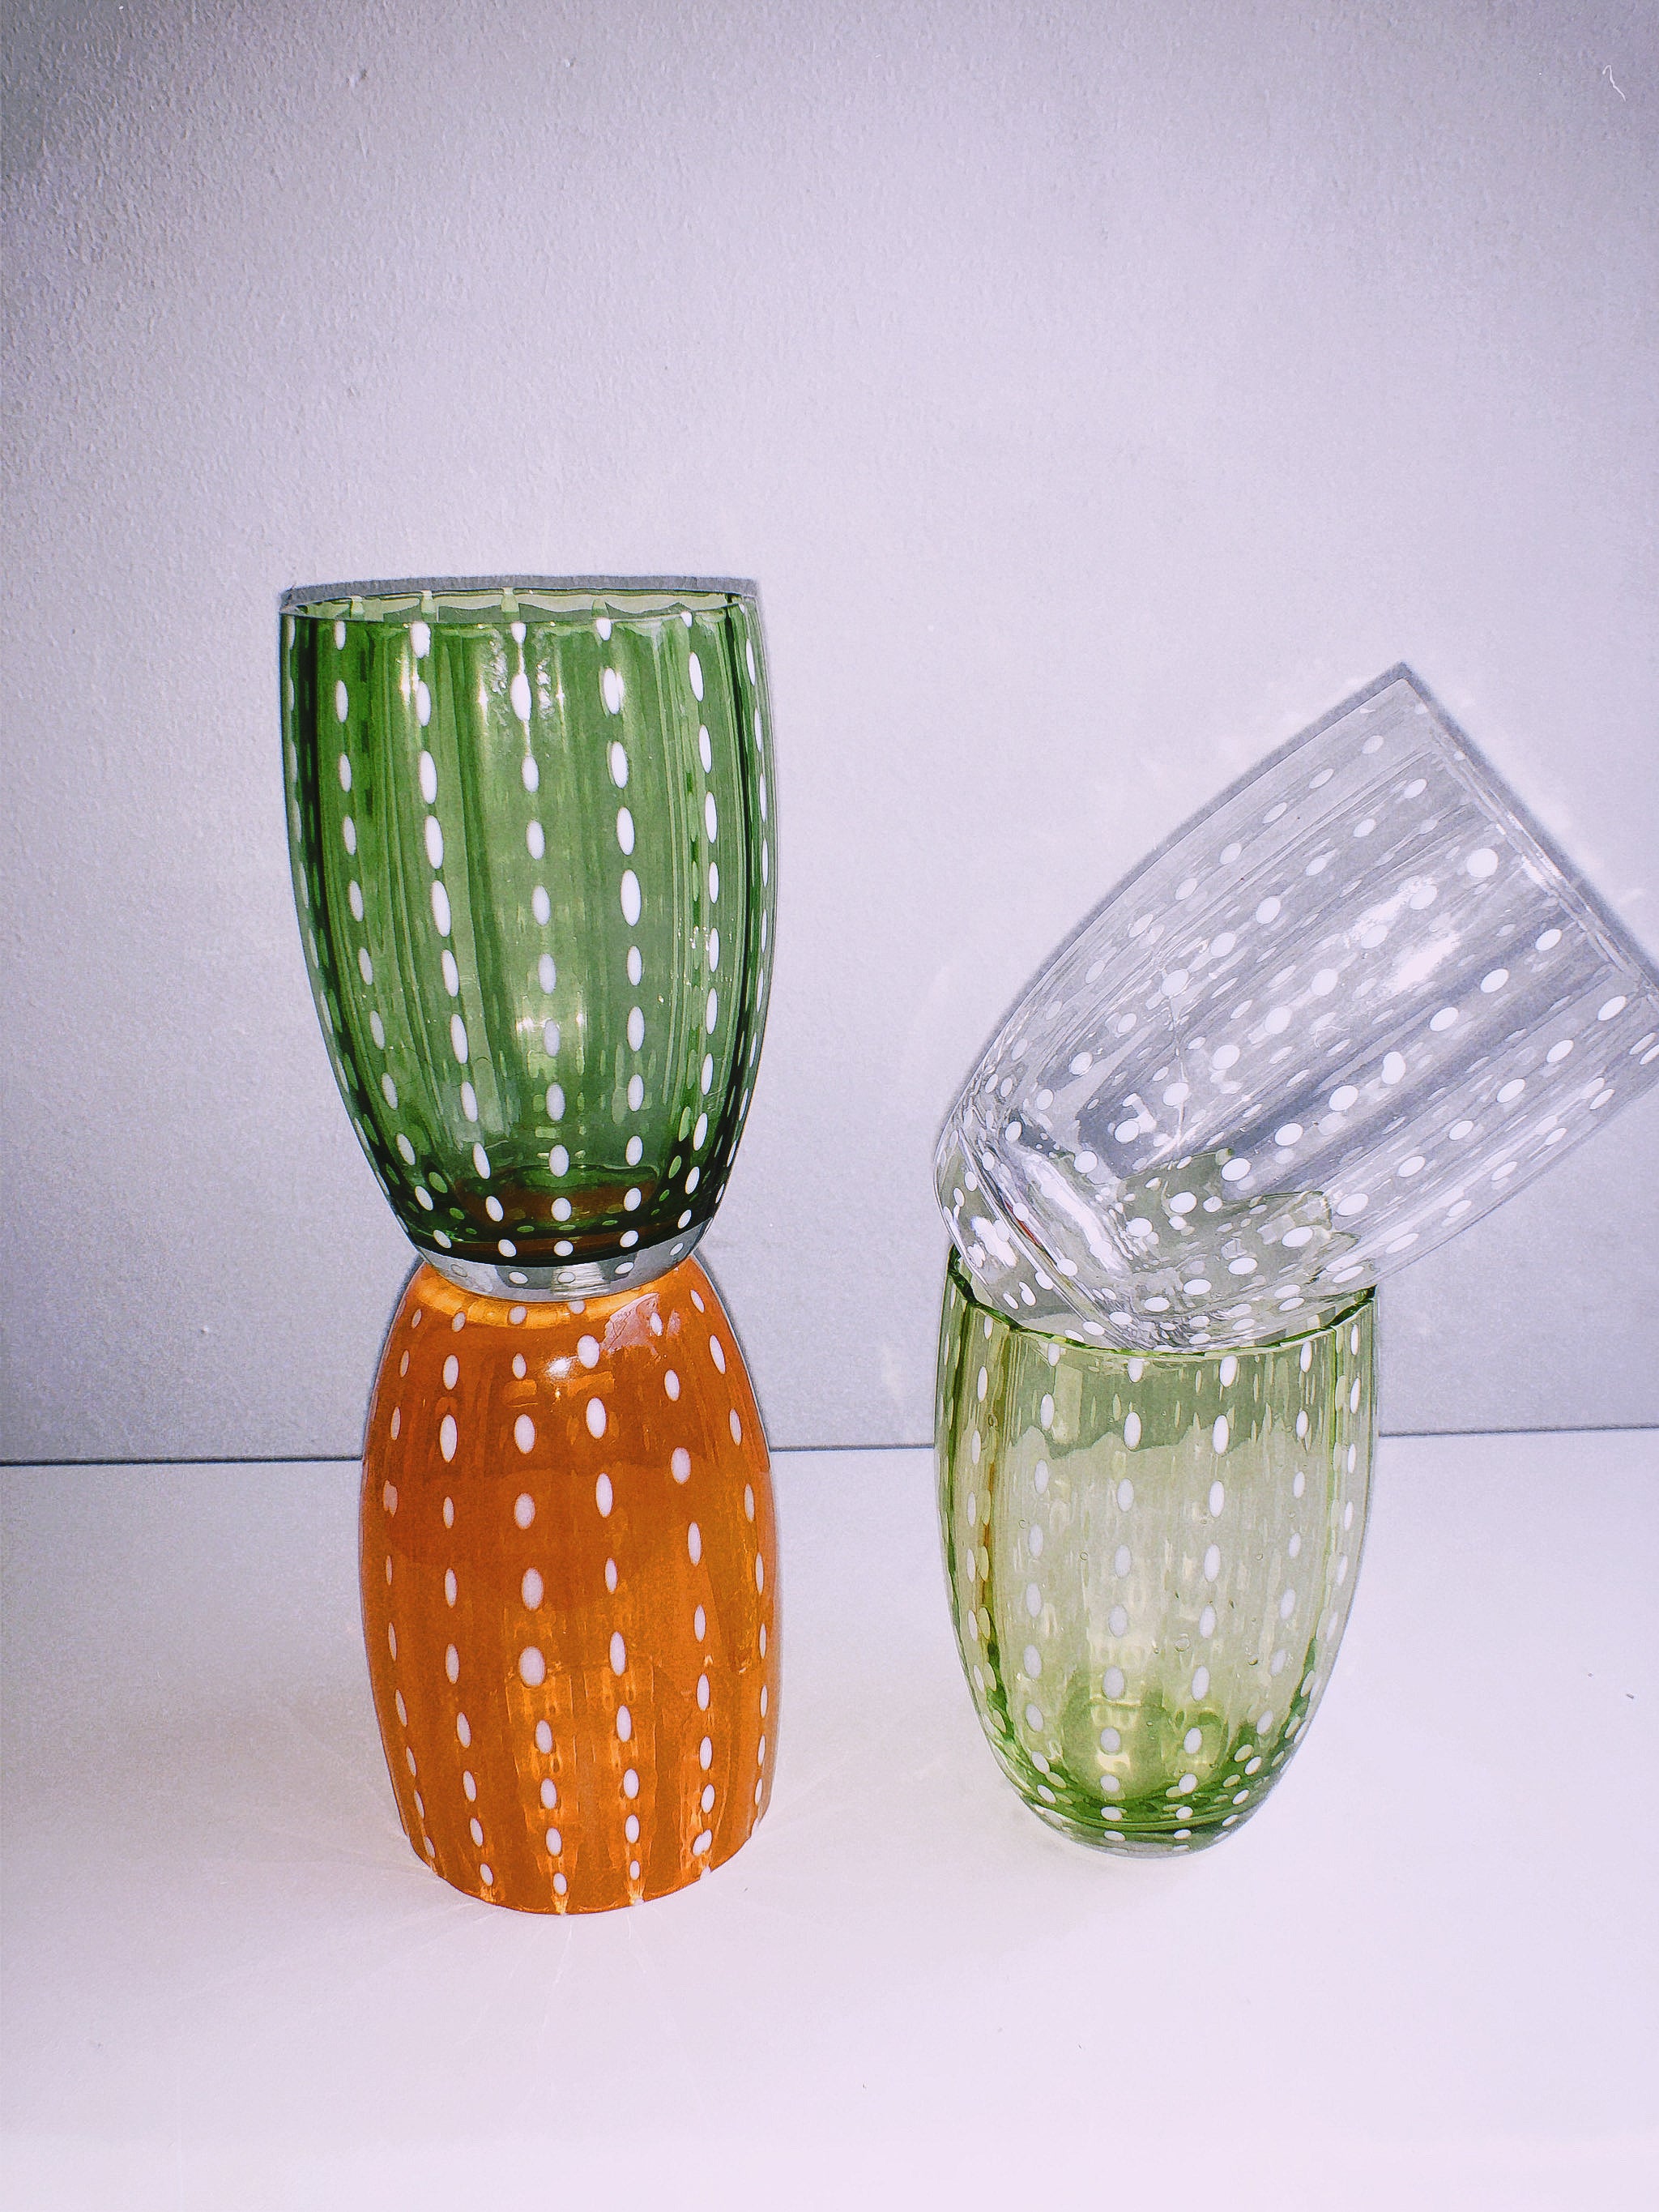 Handmade Watermelon Glasses in Chilli by PROSE Tabletop